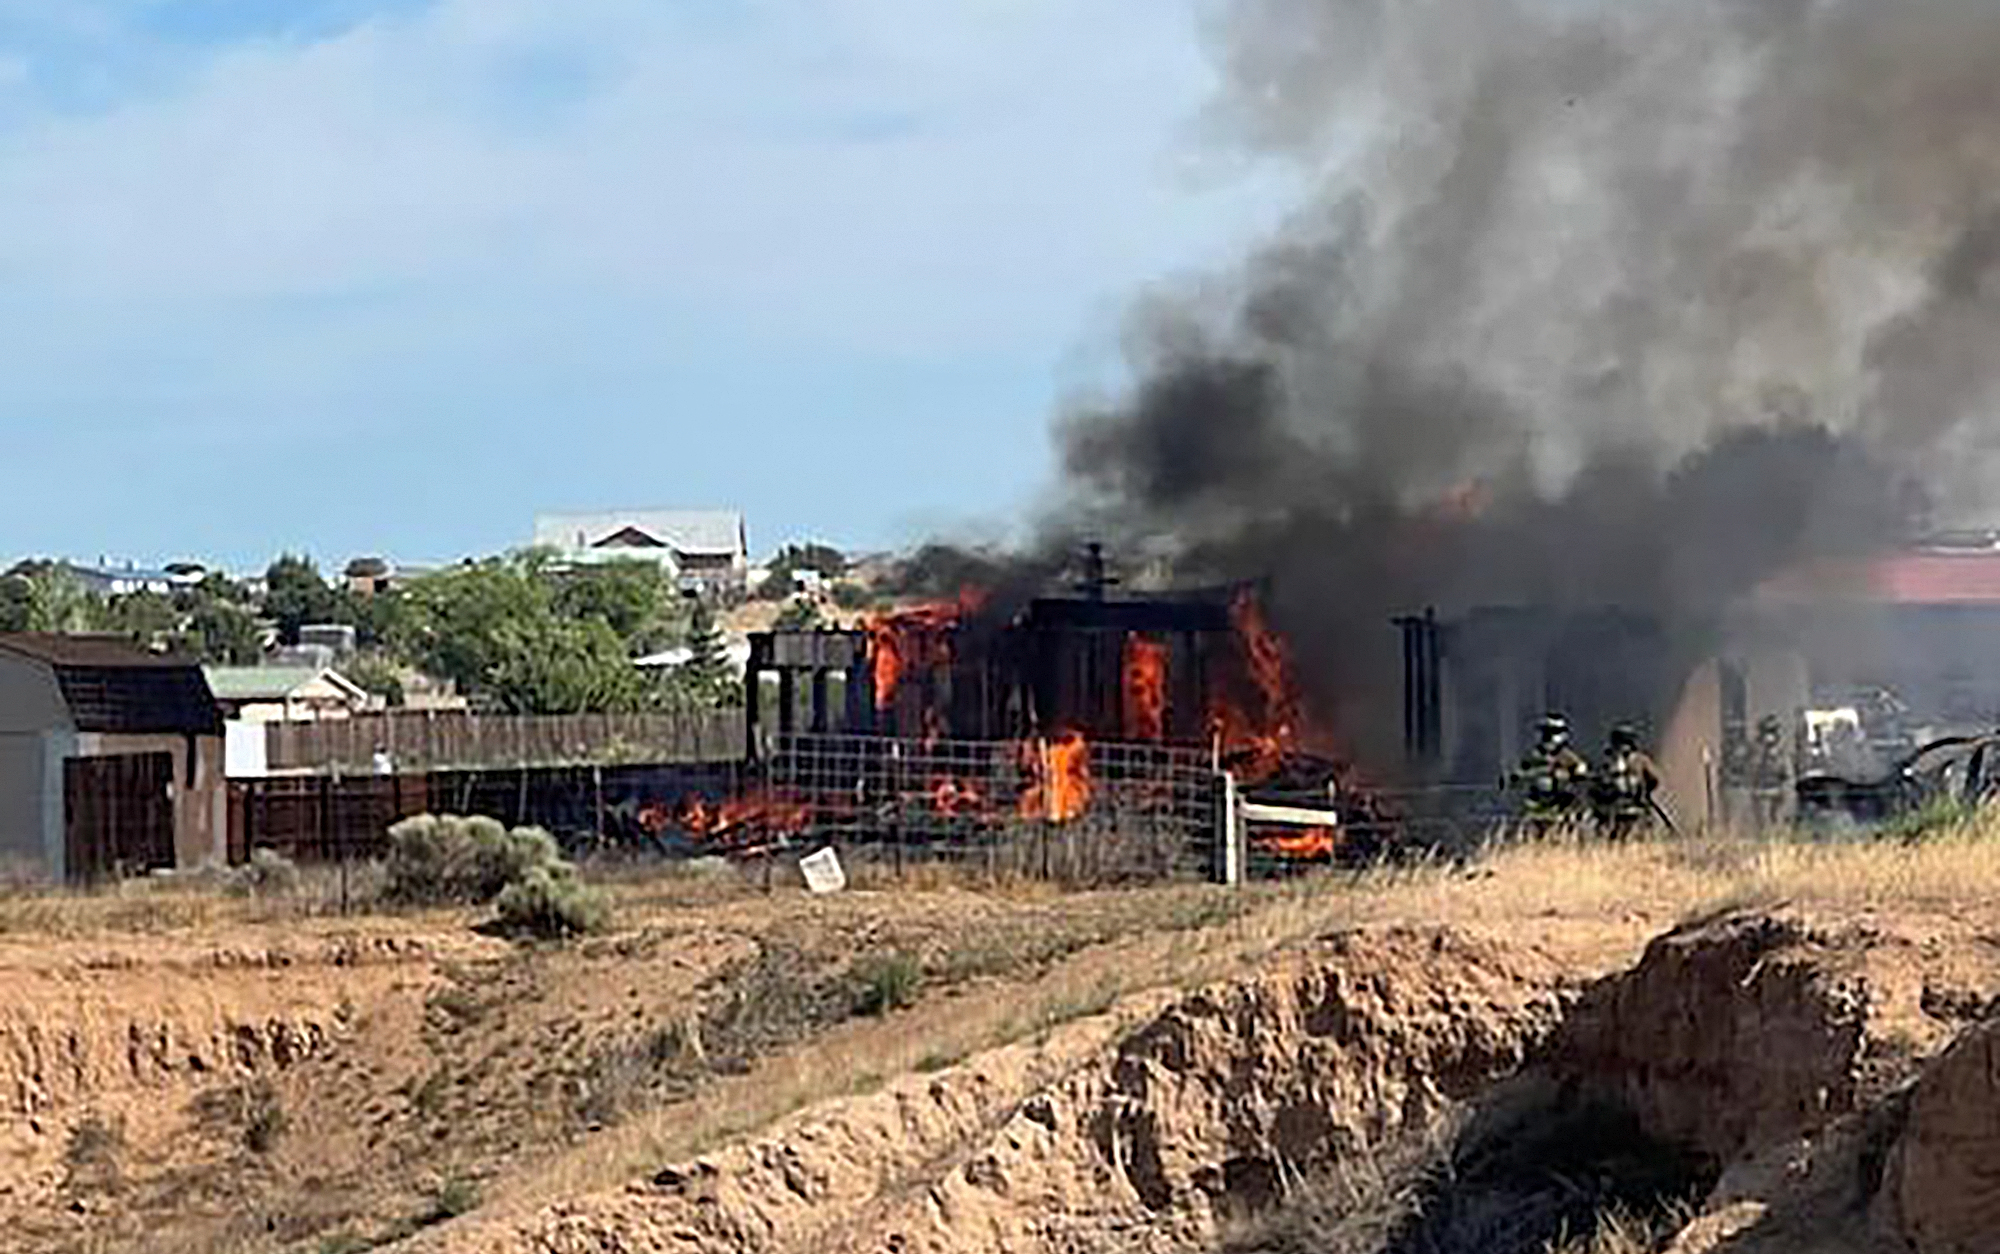 PHOTO: The Santa Fe County Sheriff released this photo on social media after a small plane crashed into a home in Santa Fe, New Mexico, July 18, 2023.